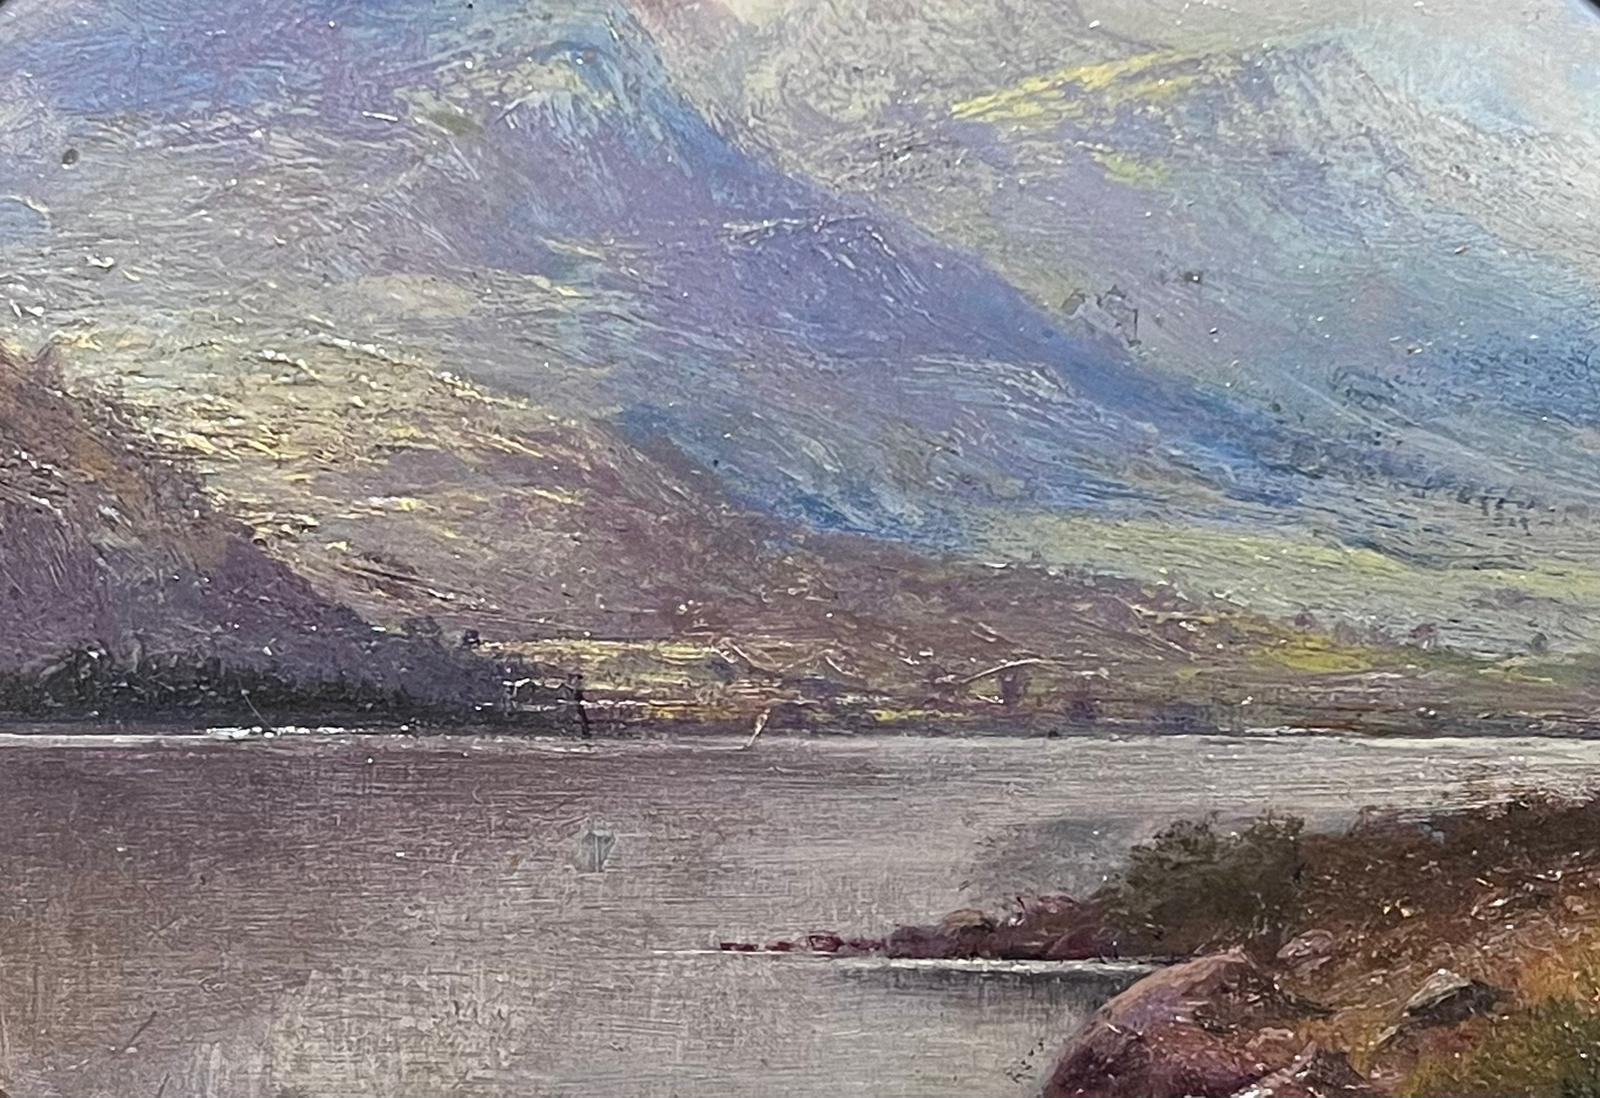 The Highland Loch
Scottish School, early 20th century
oil on board, framed
framed: 7 x 8.5 inches 
board: 6 x 7.5 inches
provenance: private collection, UK
condition: very good and sound condition 